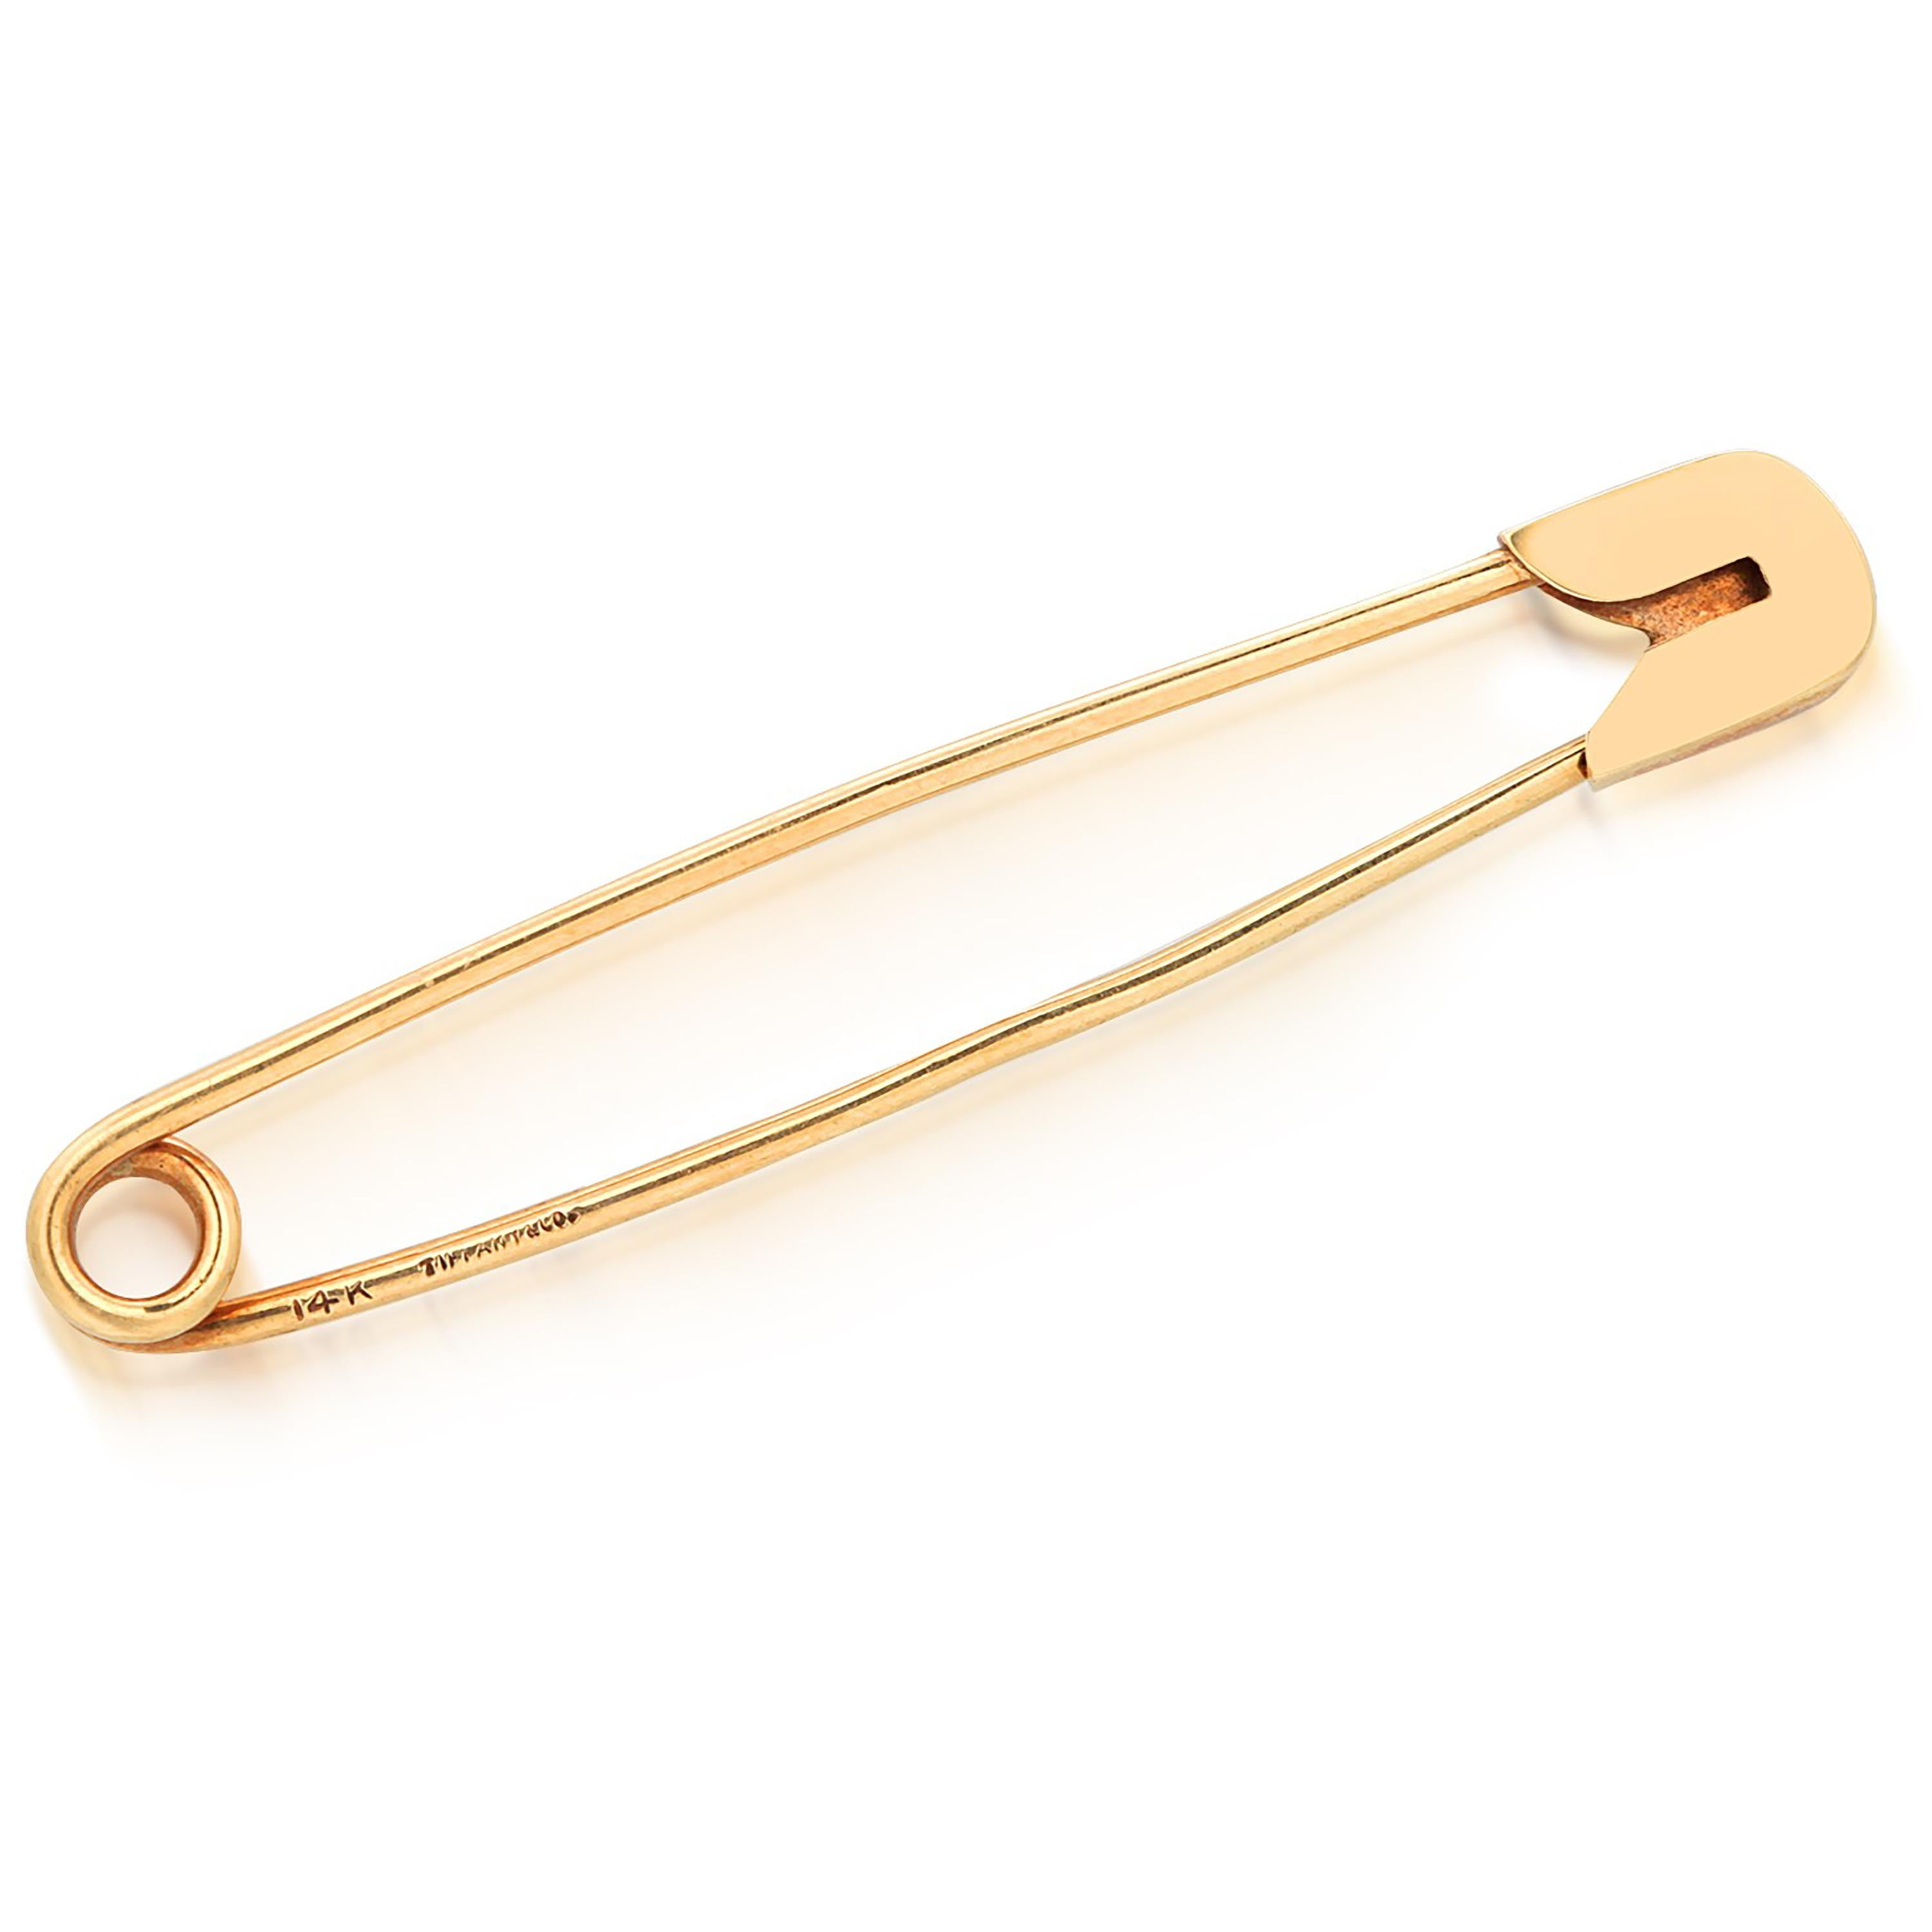 Vintage Tiffany Co. 14 Karat Yellow Gold 2.12 Inch Long Safety Pin In Good Condition For Sale In New York, NY